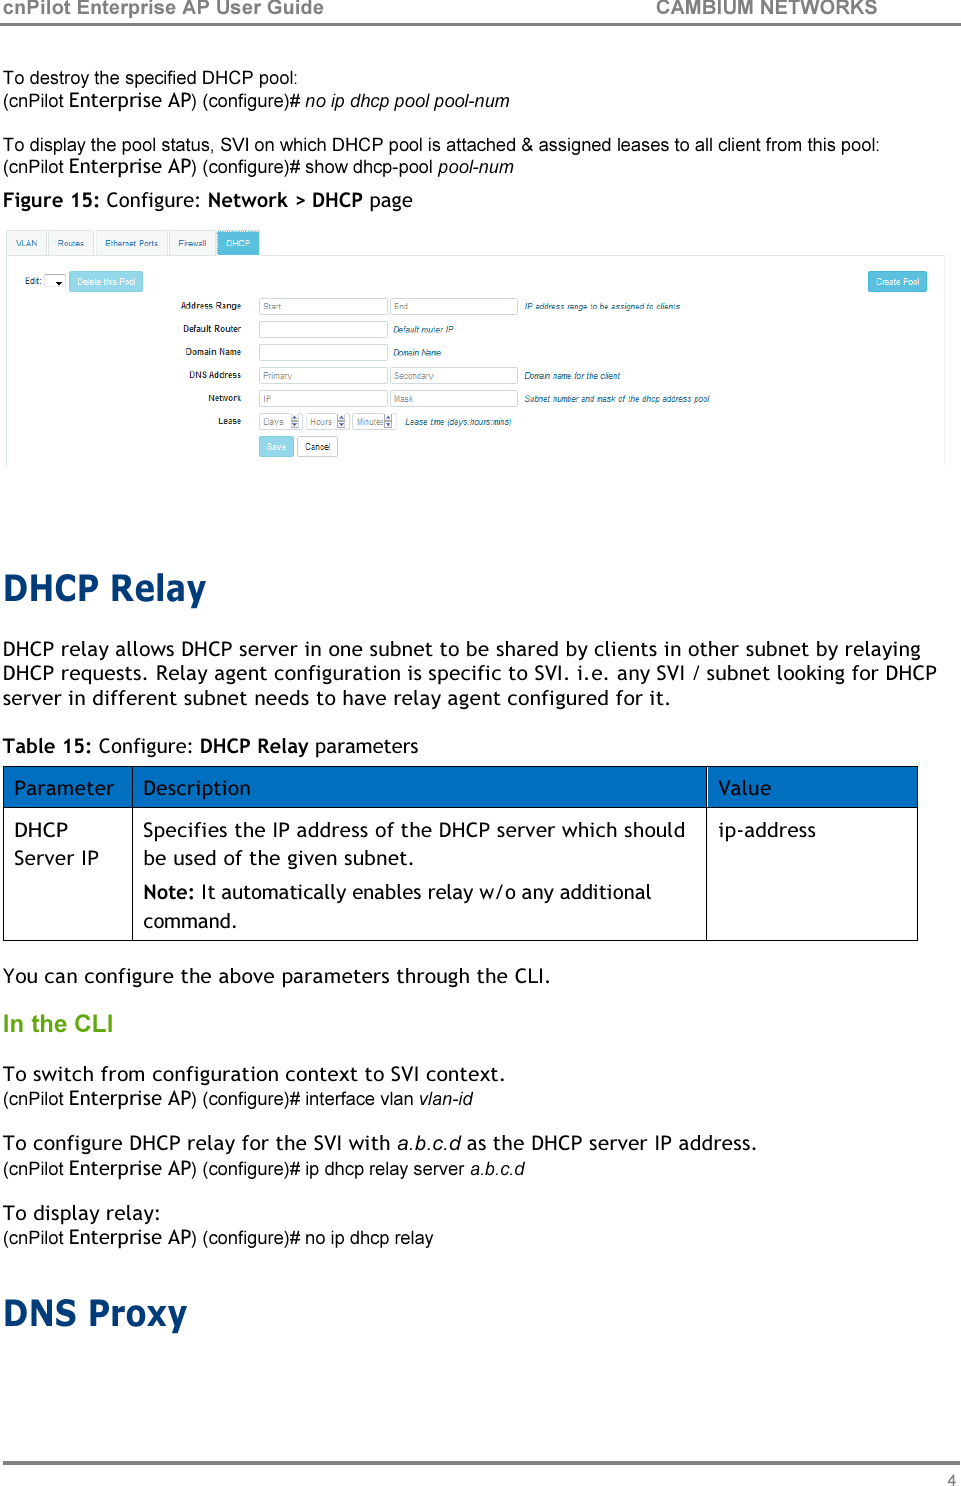 49 cnPilot Enterprise AP User Guide CAMBIUM NETWORKS    To destroy the specified DHCP pool: (cnPilot Enterprise AP) (configure)# no ip dhcp pool pool-num To display the pool status, SVI on which DHCP pool is attached &amp; assigned leases to all client from this pool: (cnPilot Enterprise AP) (configure)# show dhcp-pool pool-num Figure 15: Configure: Network &gt; DHCP page     DHCP Relay DHCP relay allows DHCP server in one subnet to be shared by clients in other subnet by relaying DHCP requests. Relay agent configuration is specific to SVI. i.e. any SVI / subnet looking for DHCP server in different subnet needs to have relay agent configured for it.  Table 15: Configure: DHCP Relay parameters  Parameter Description Value DHCP Server IP Specifies the IP address of the DHCP server which should be used of the given subnet. Note: It automatically enables relay w/o any additional command. ip-address  You can configure the above parameters through the CLI. In the CLI  To switch from configuration context to SVI context. (cnPilot Enterprise AP) (configure)# interface vlan vlan-id To configure DHCP relay for the SVI with a.b.c.d as the DHCP server IP address. (cnPilot Enterprise AP) (configure)# ip dhcp relay server a.b.c.d To display relay: (cnPilot Enterprise AP) (configure)# no ip dhcp relay  DNS Proxy 